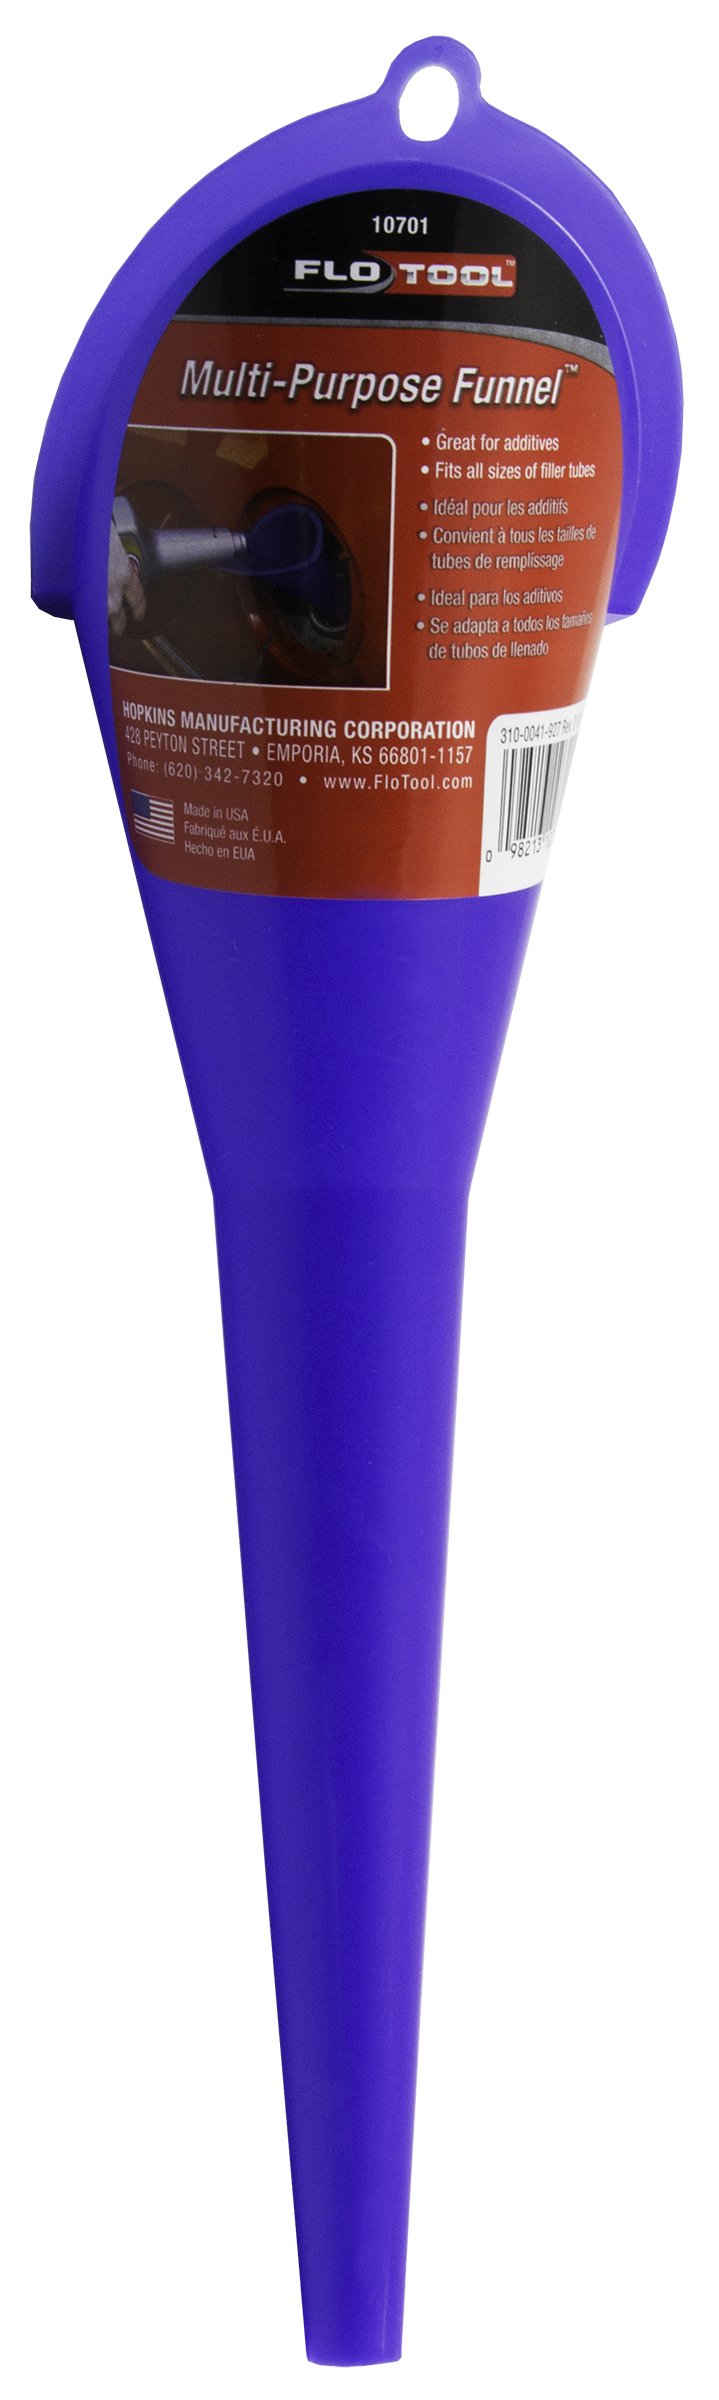 FloTool Spill Saver Multi-Purpose Funnel $1 + Free Shipping w/ Prime or on $35+